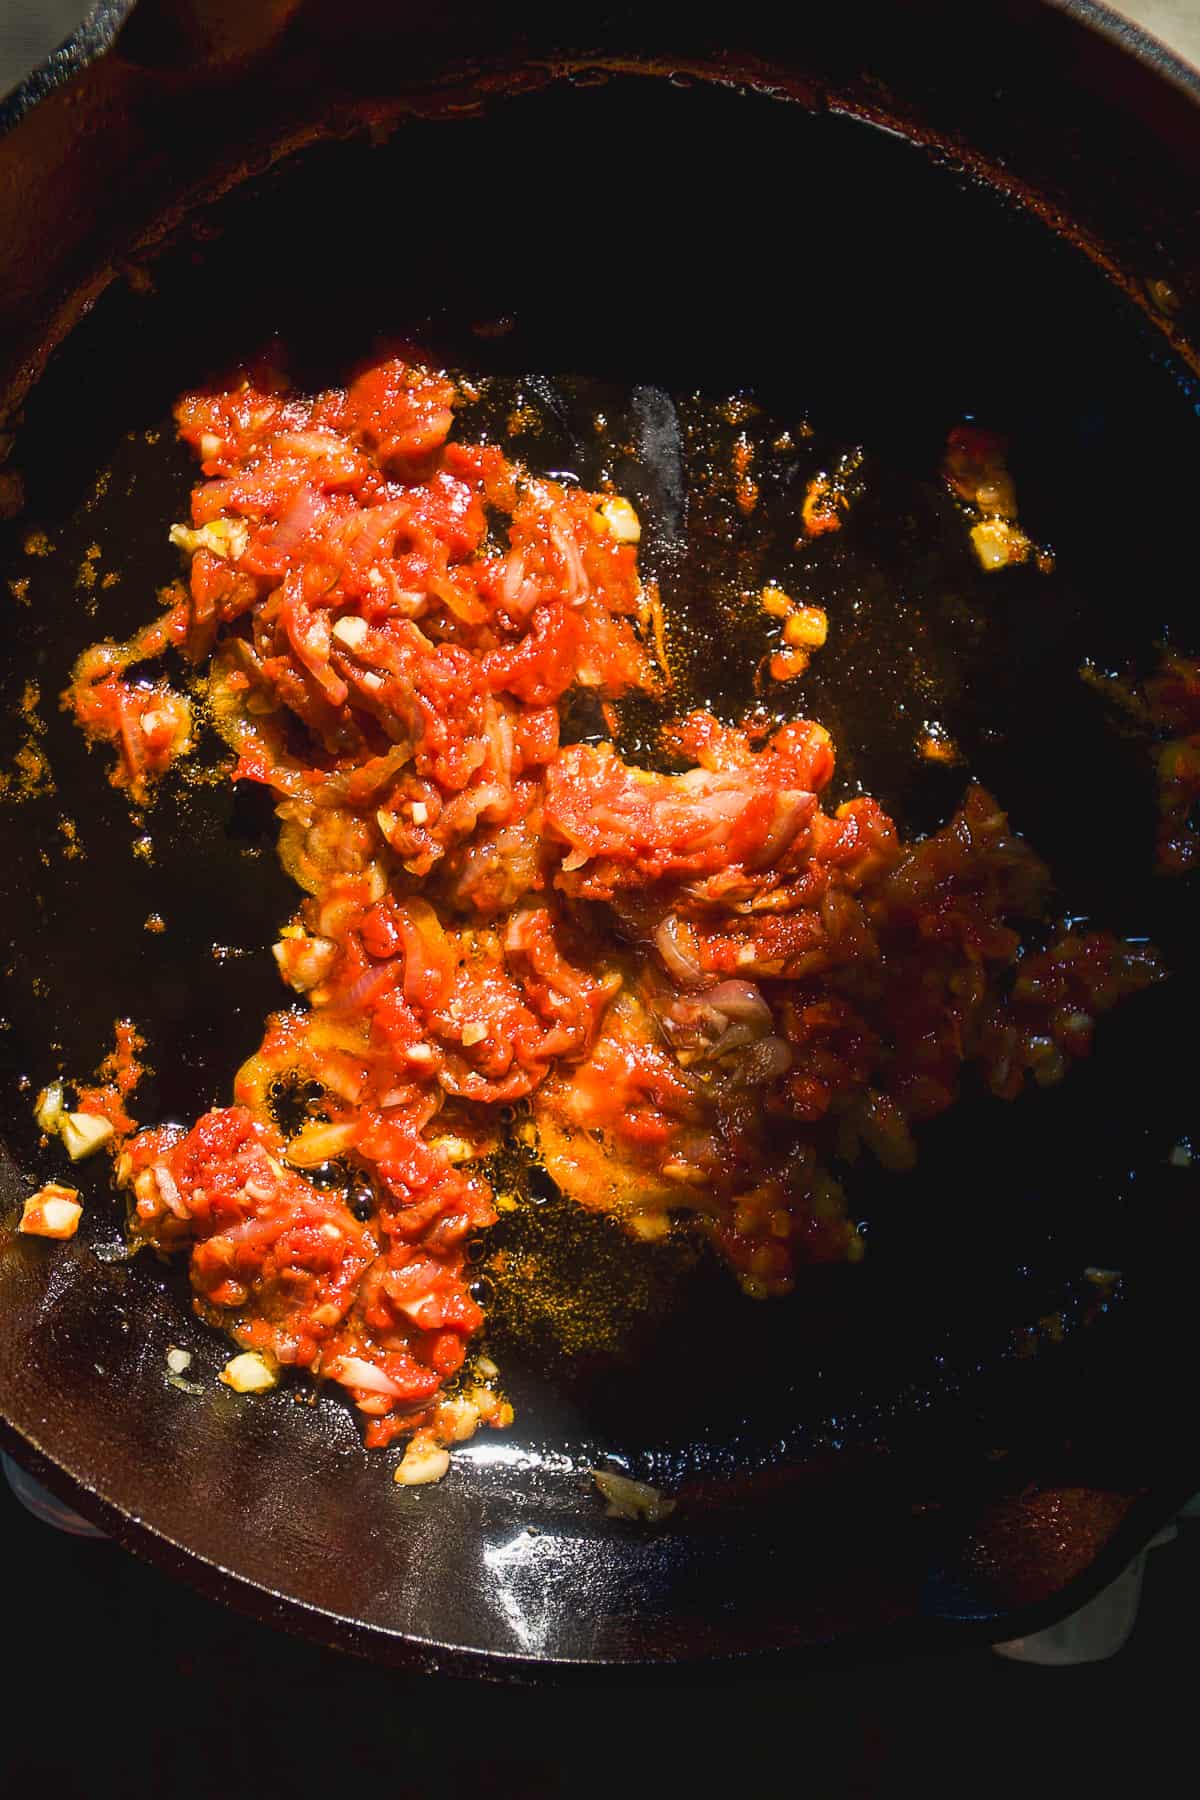 Tomato paste cooking in a cast iron skillet.